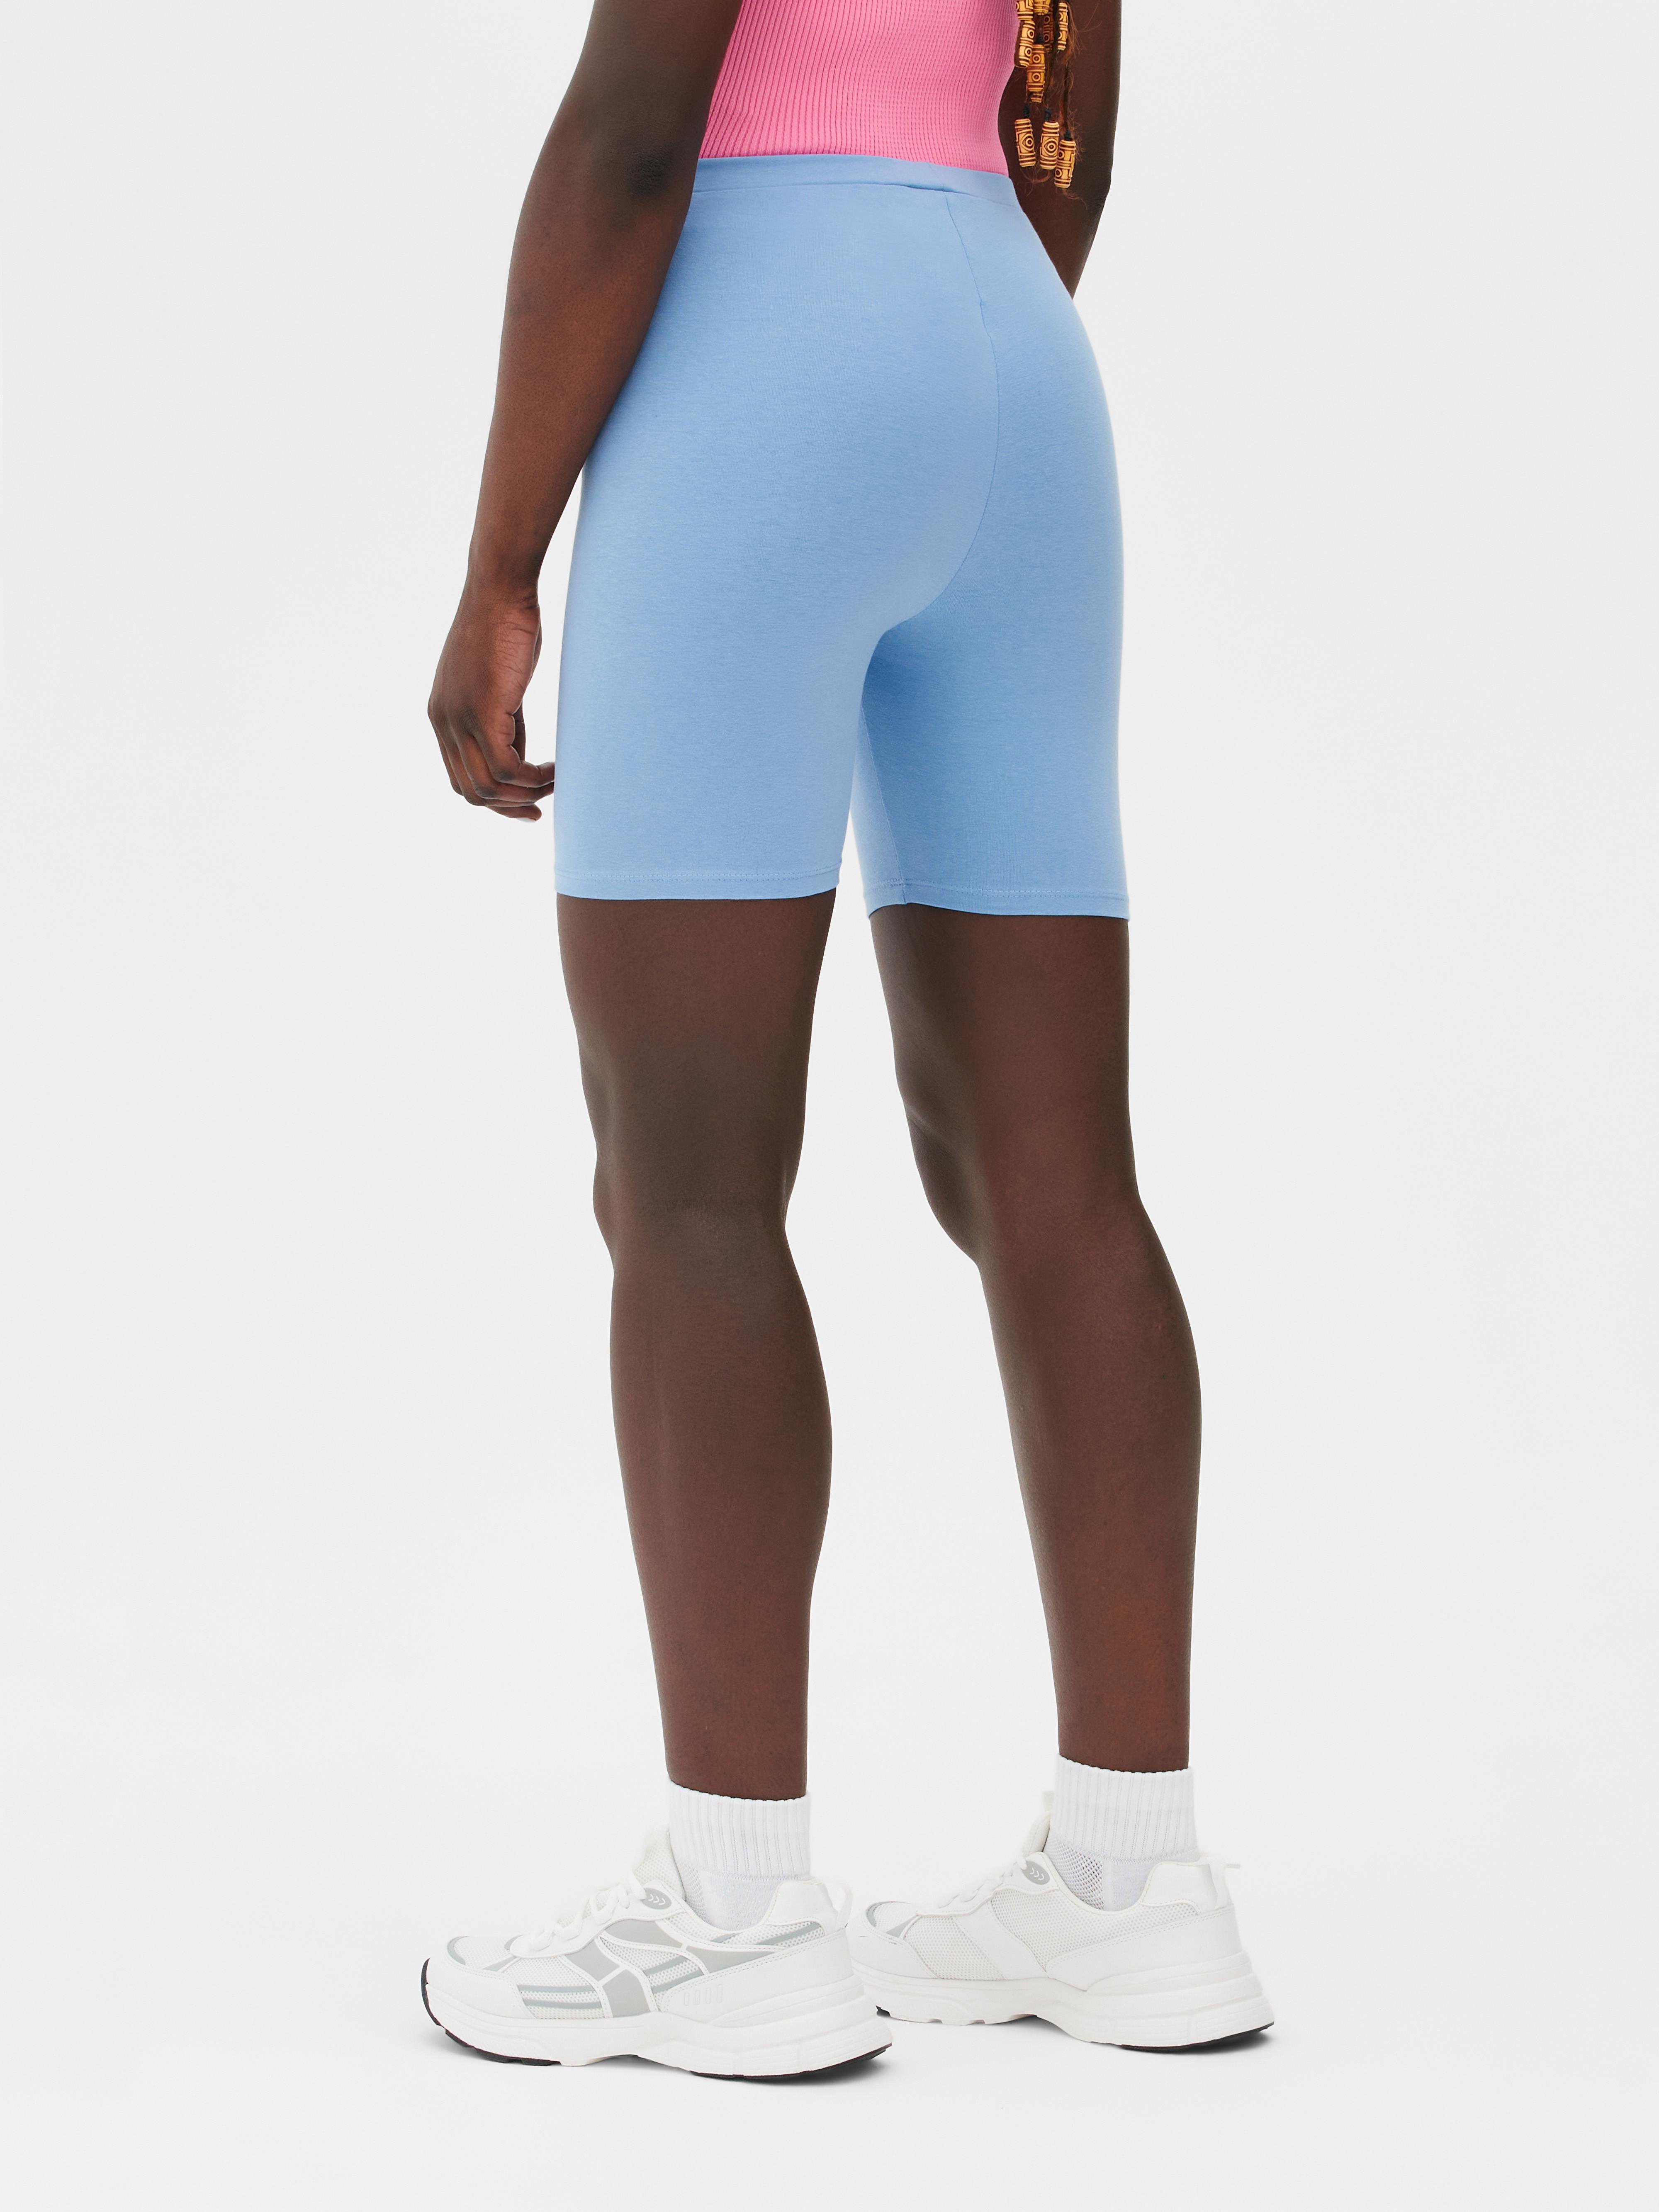 Cotton Cycling Shorts | Primark